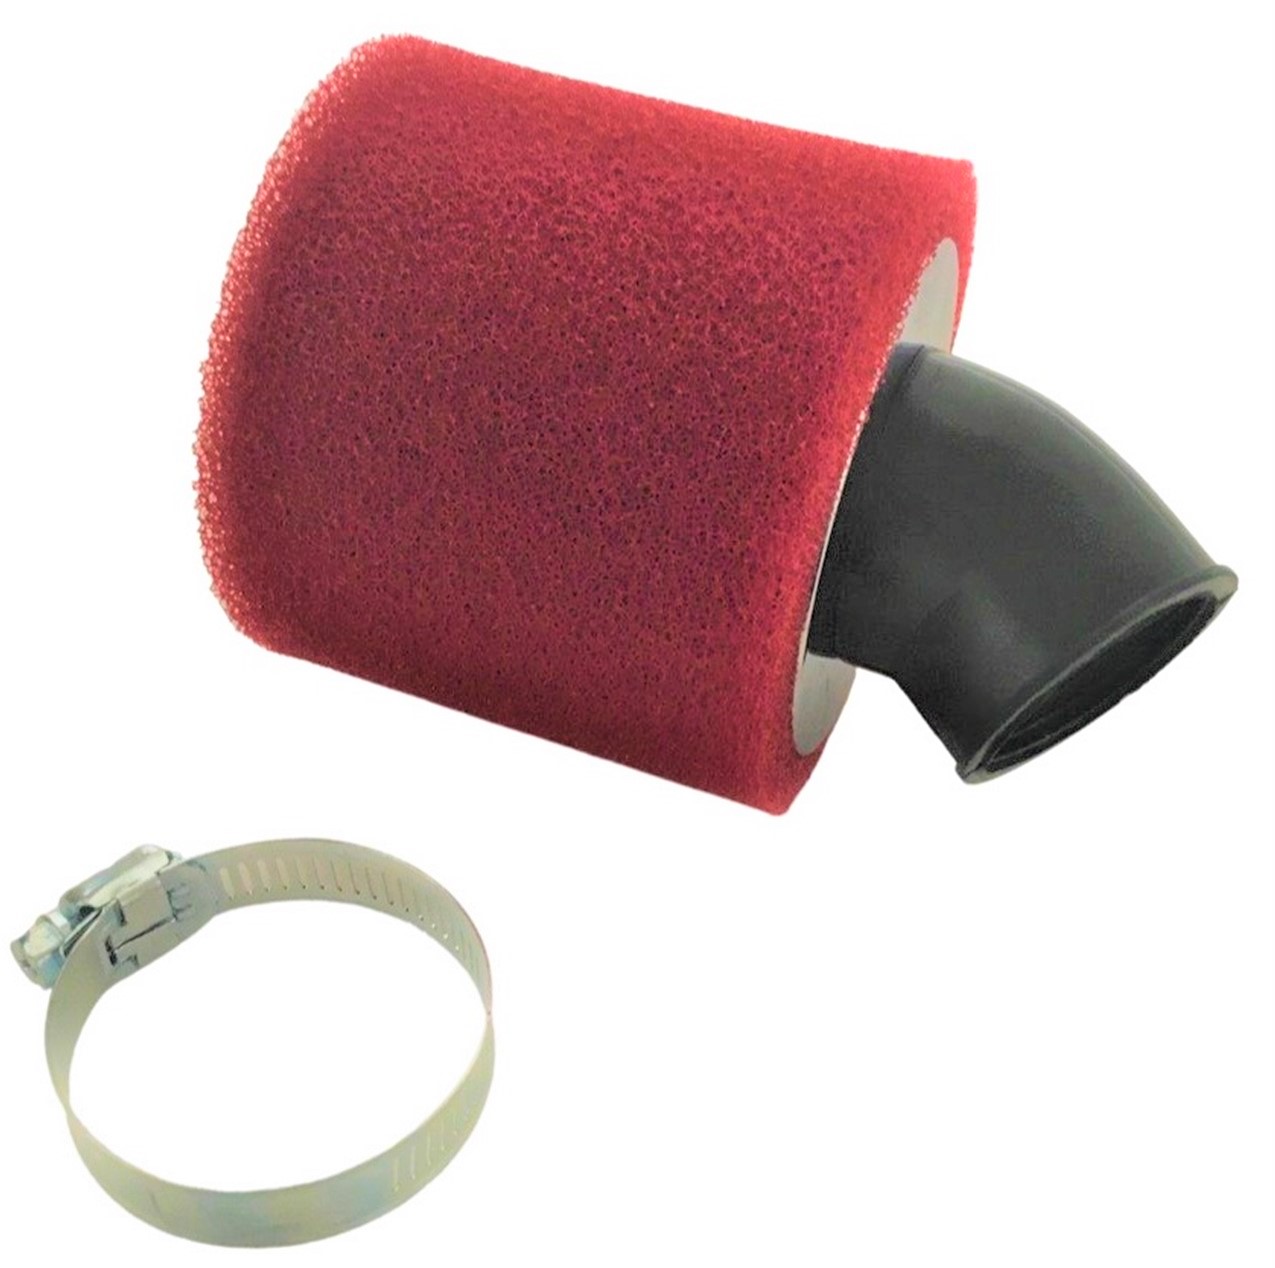 Air Filter ID=38mm 45d ANGLE, Filter OD=88mm, Length=80 - Click Image to Close